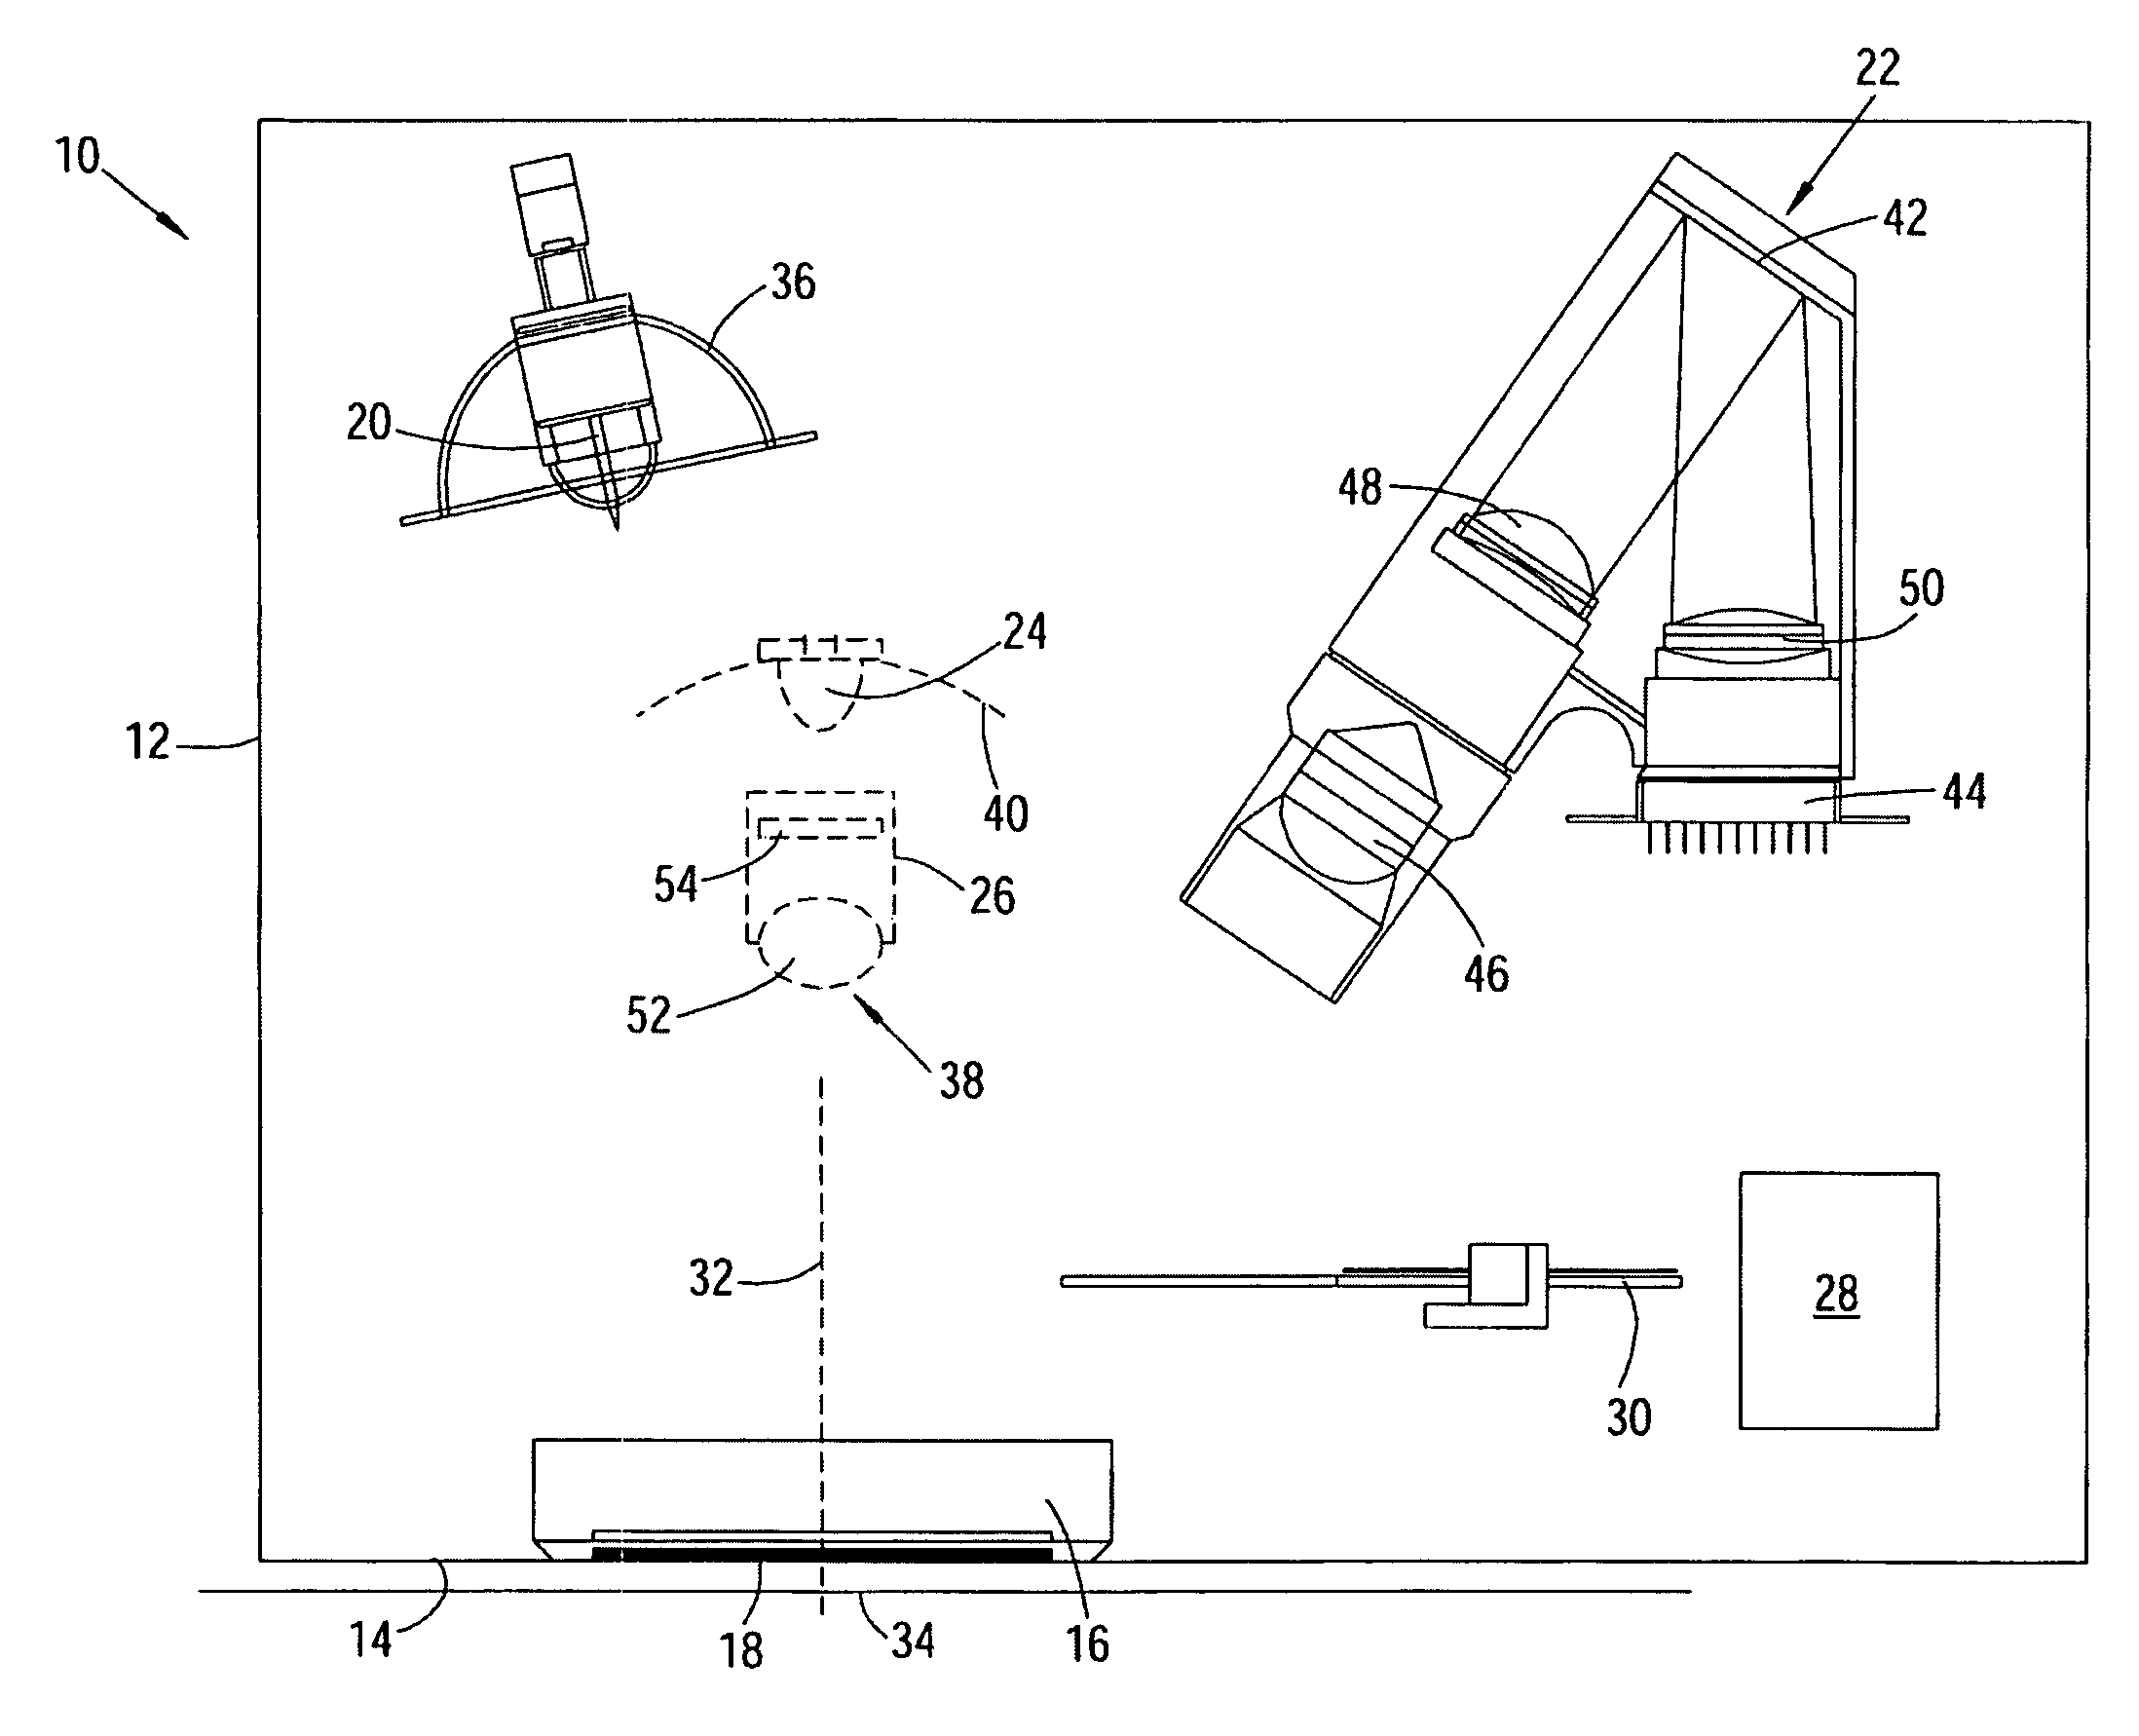 Measuring device for optical and spectroscopic examination of a sample